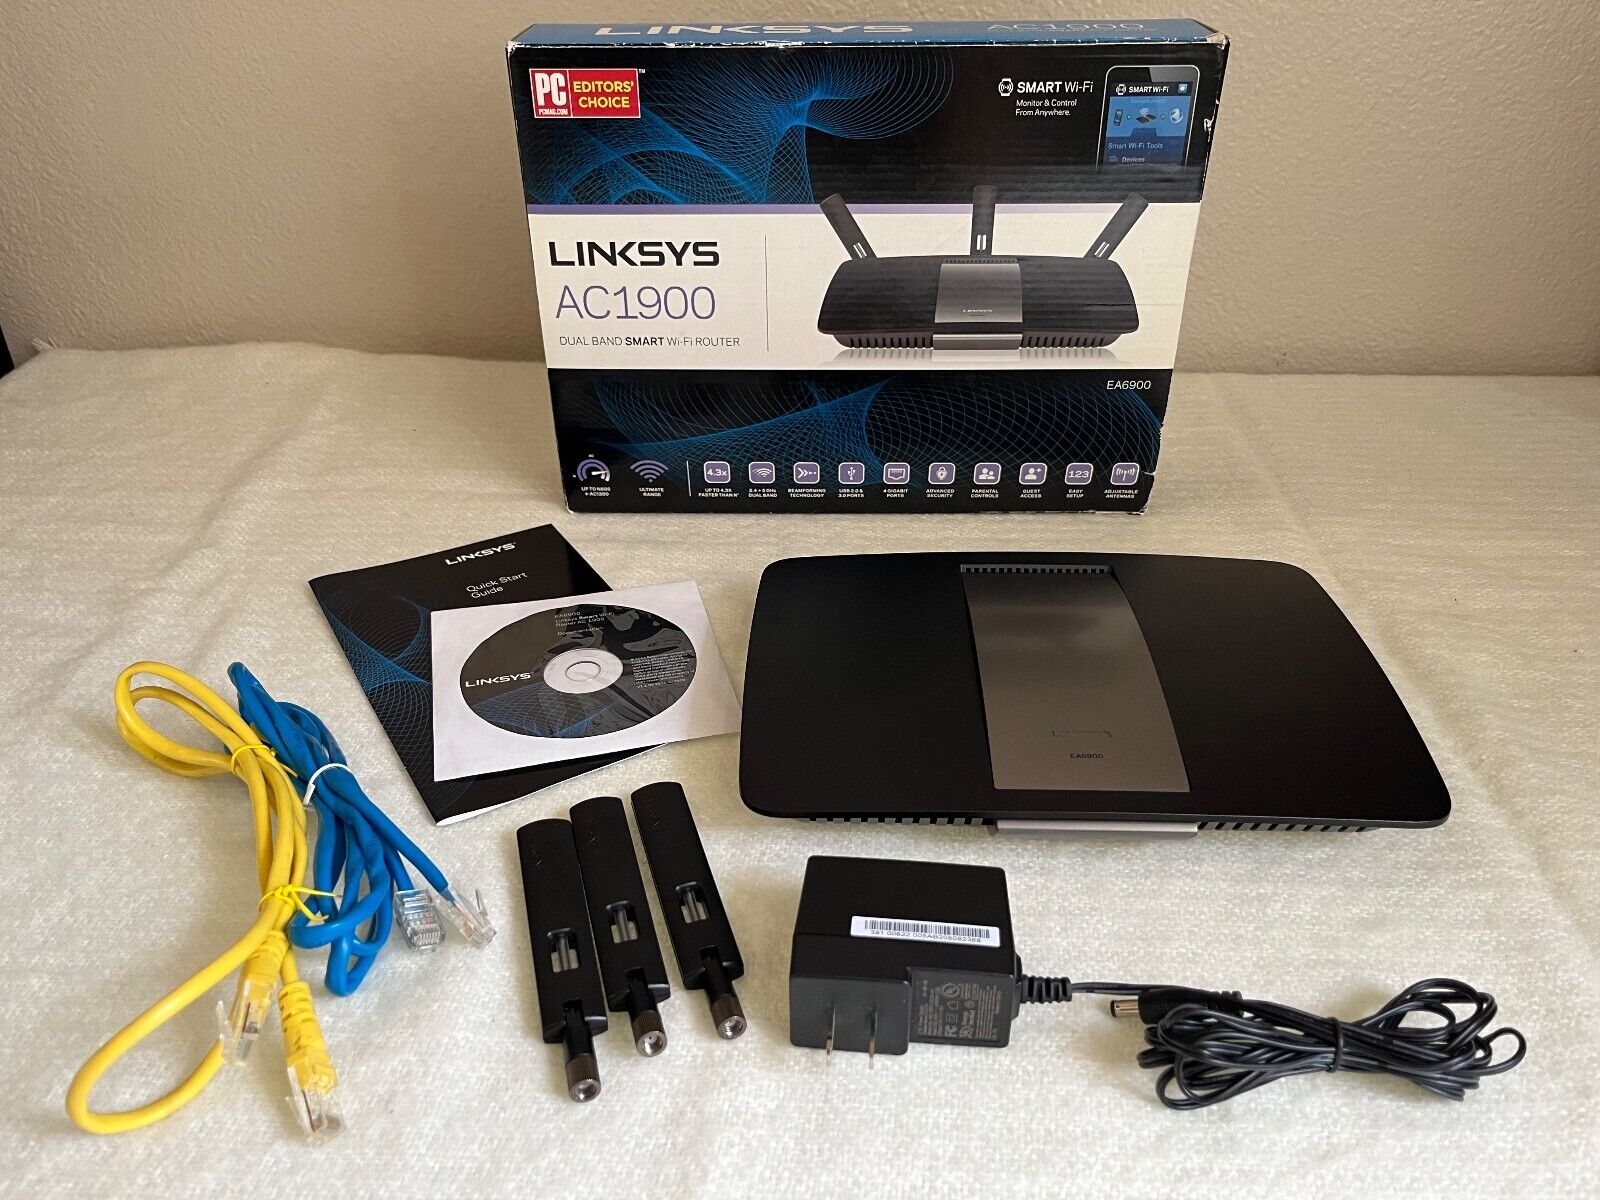 Linksys EA6900 AC1900 Smart WiFi Dual-Band Router **COMES WITH EVERYTHING**